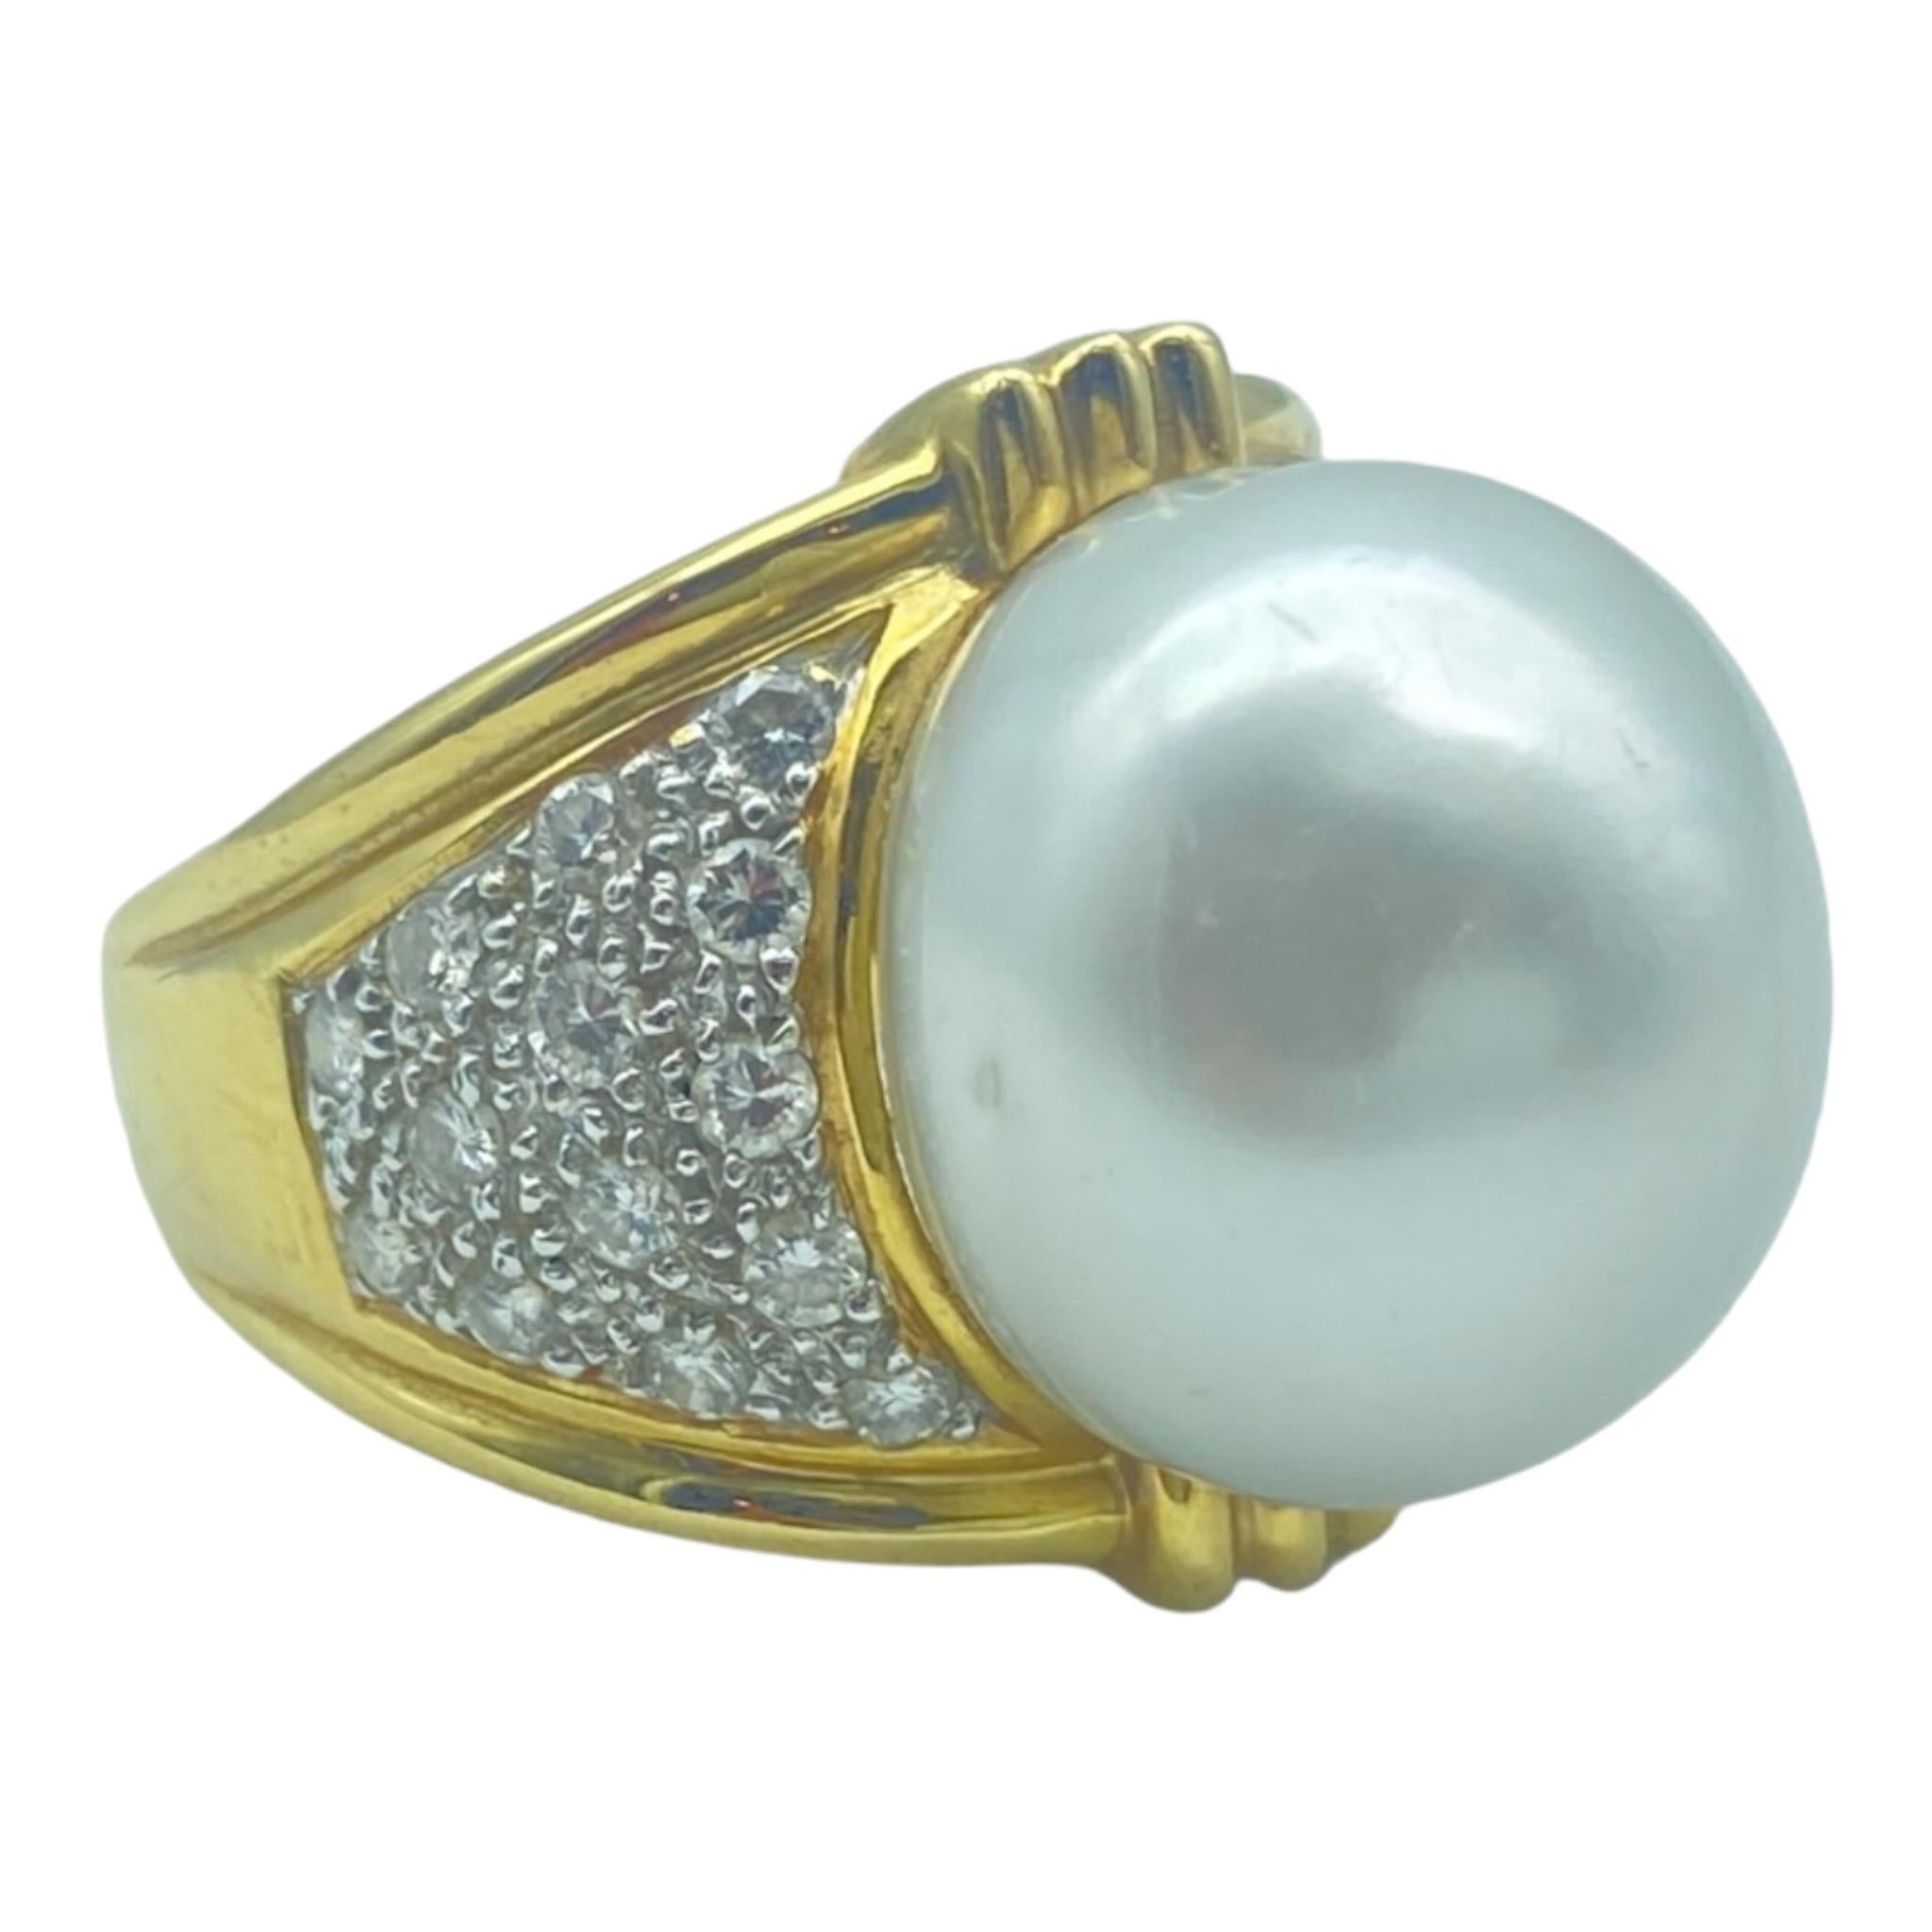 This large South Sea pearl has a great color and lustrous shine; The pearl is 17mm set in a heavy yellow gold setting made from 18 karat gold. The contemporary style is desirable, with the pave diamonds on the ground measuring 21 mm and 14.61 mm